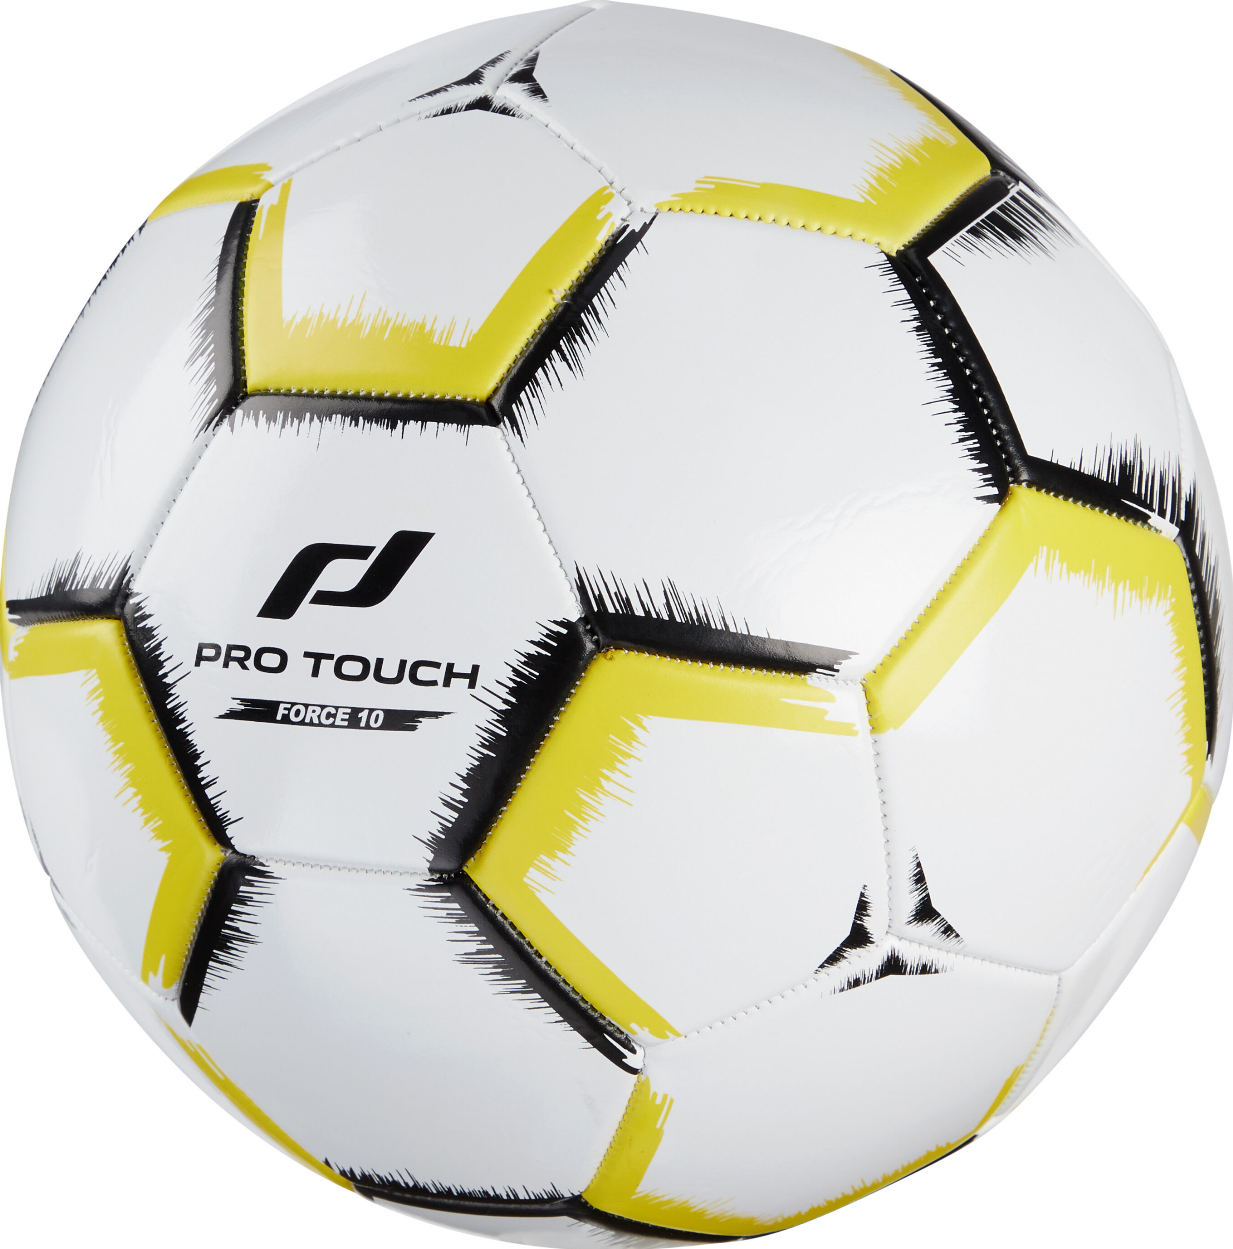 Pro Touch FORCE 10